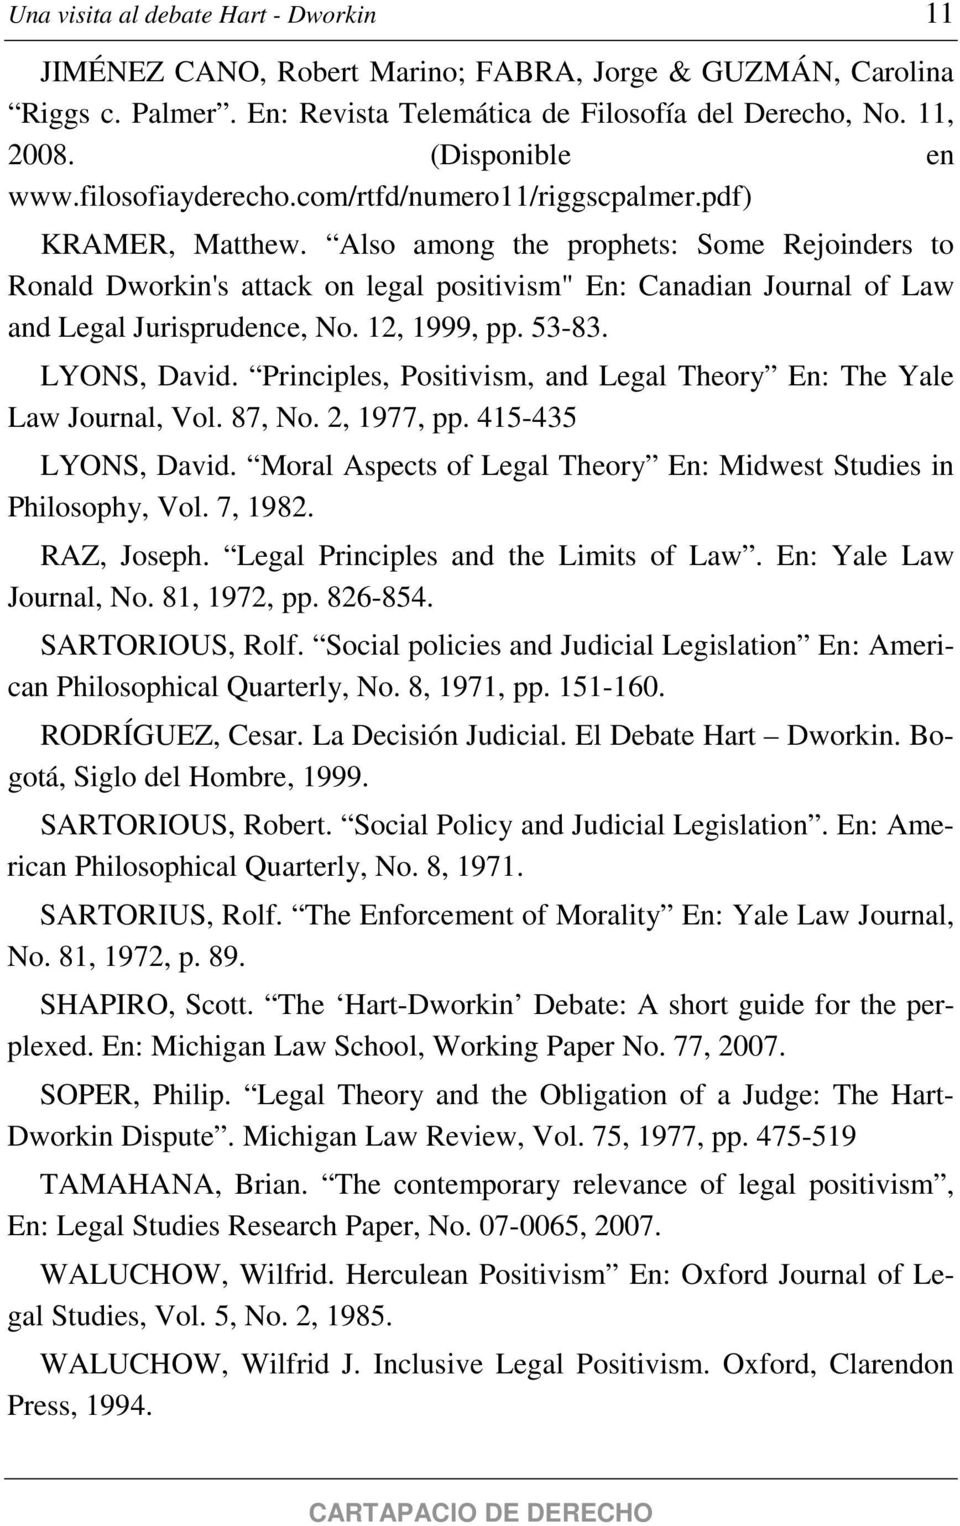 Also among the prophets: Some Rejoinders to Ronald Dworkin's attack on legal positivism" En: Canadian Journal of Law and Legal Jurisprudence, No. 12, 1999, pp. 53-83. LYONS, David.